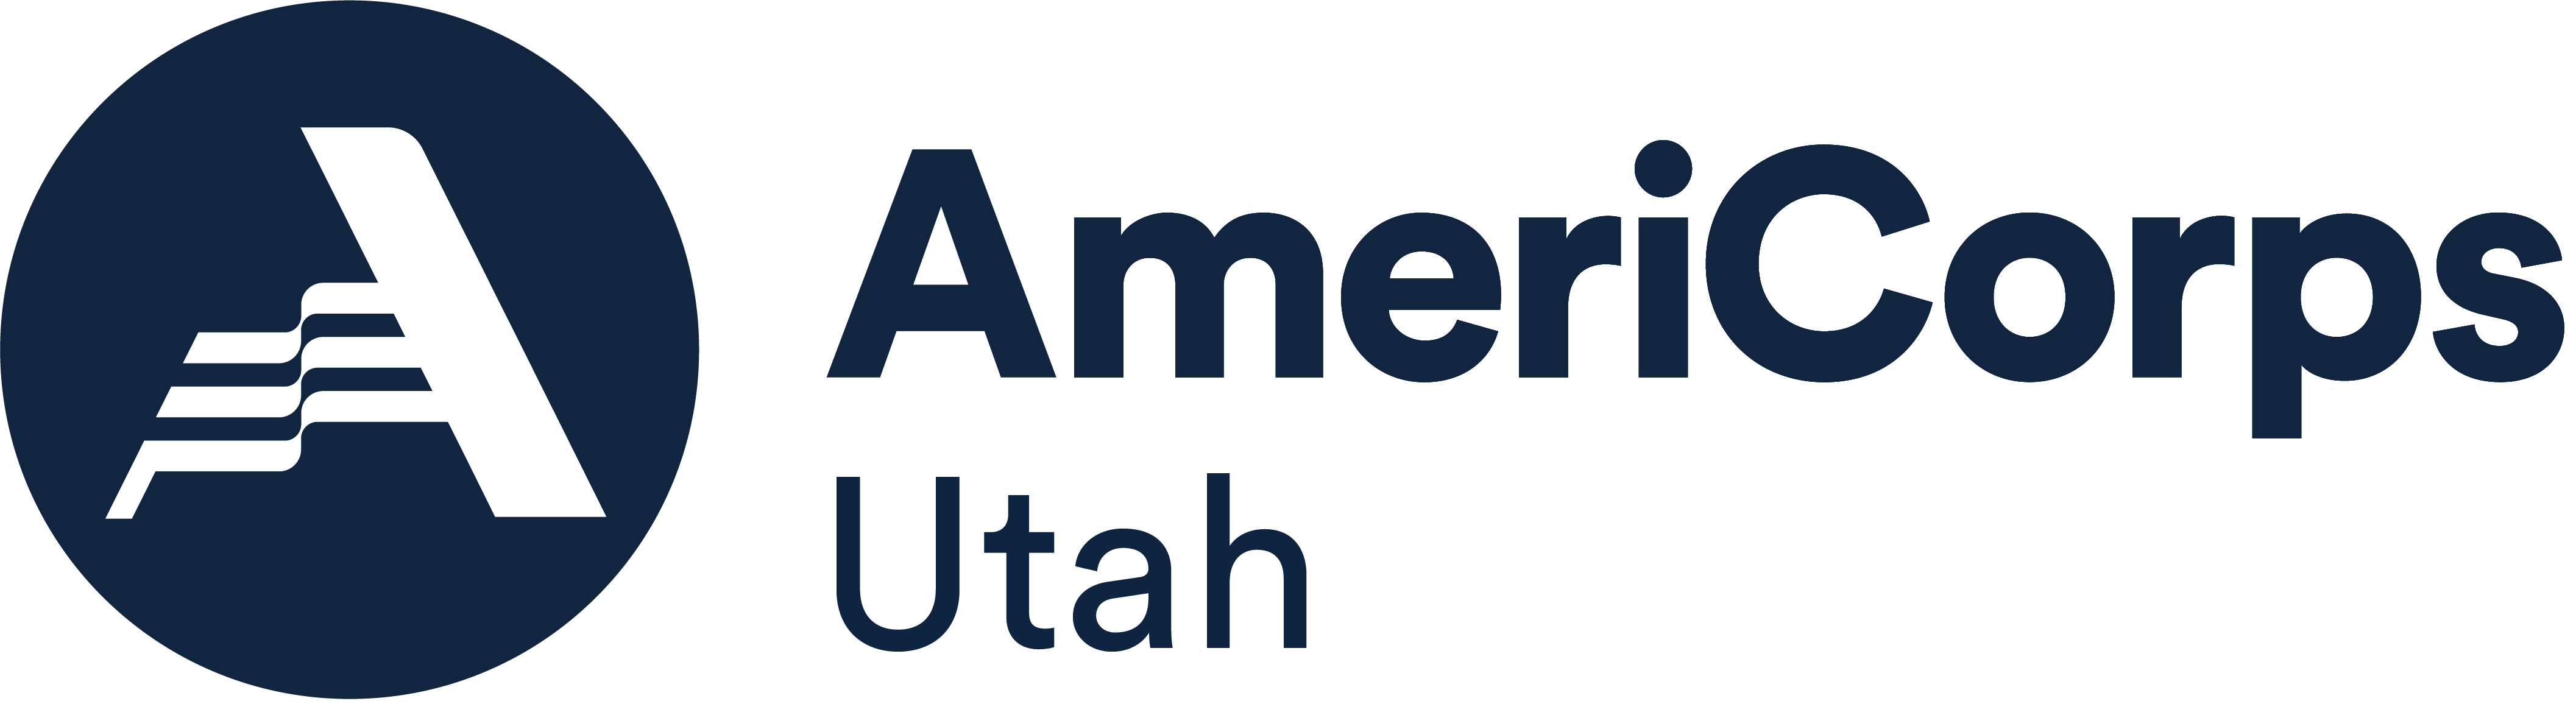 Blue circle with letter "A" in the middle, next to AmeriCorps Utah